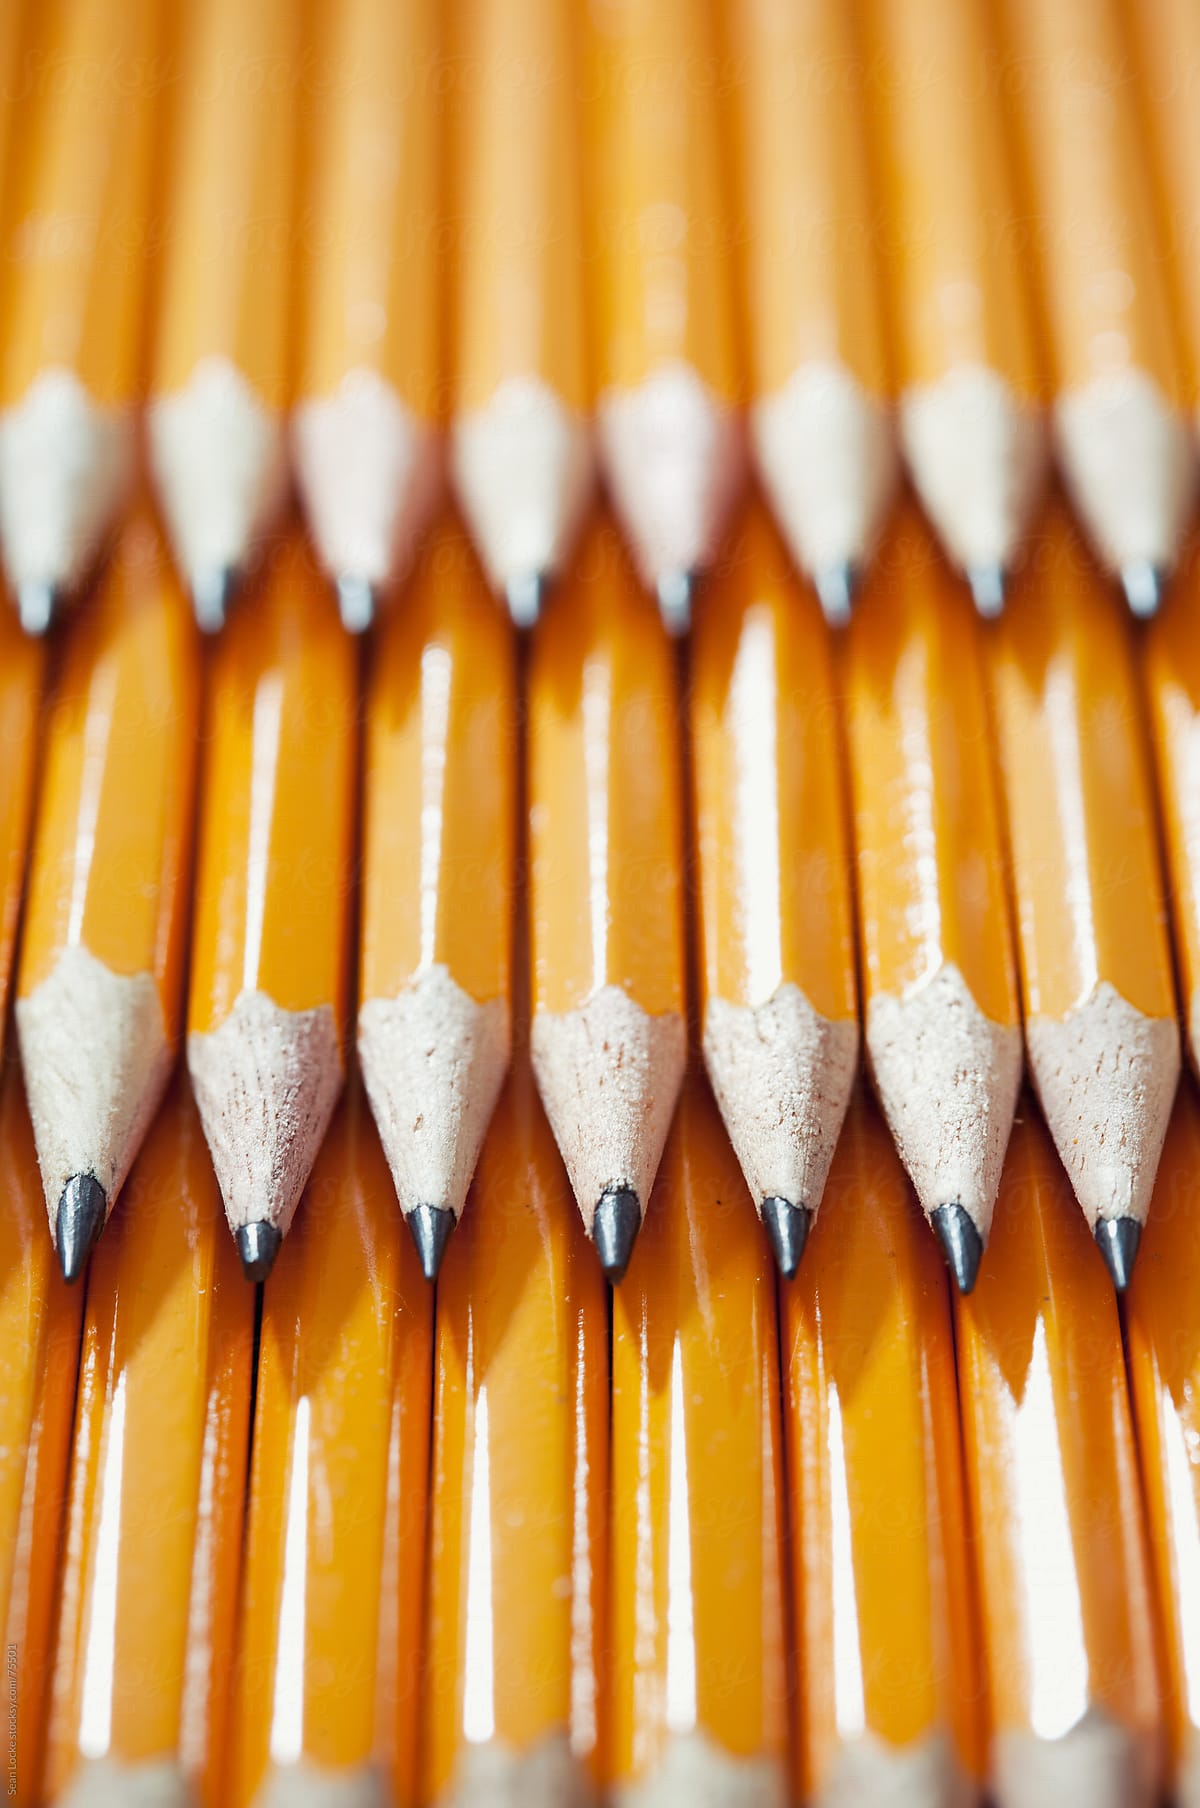 Pencils: Pencils Stacked in Pattern